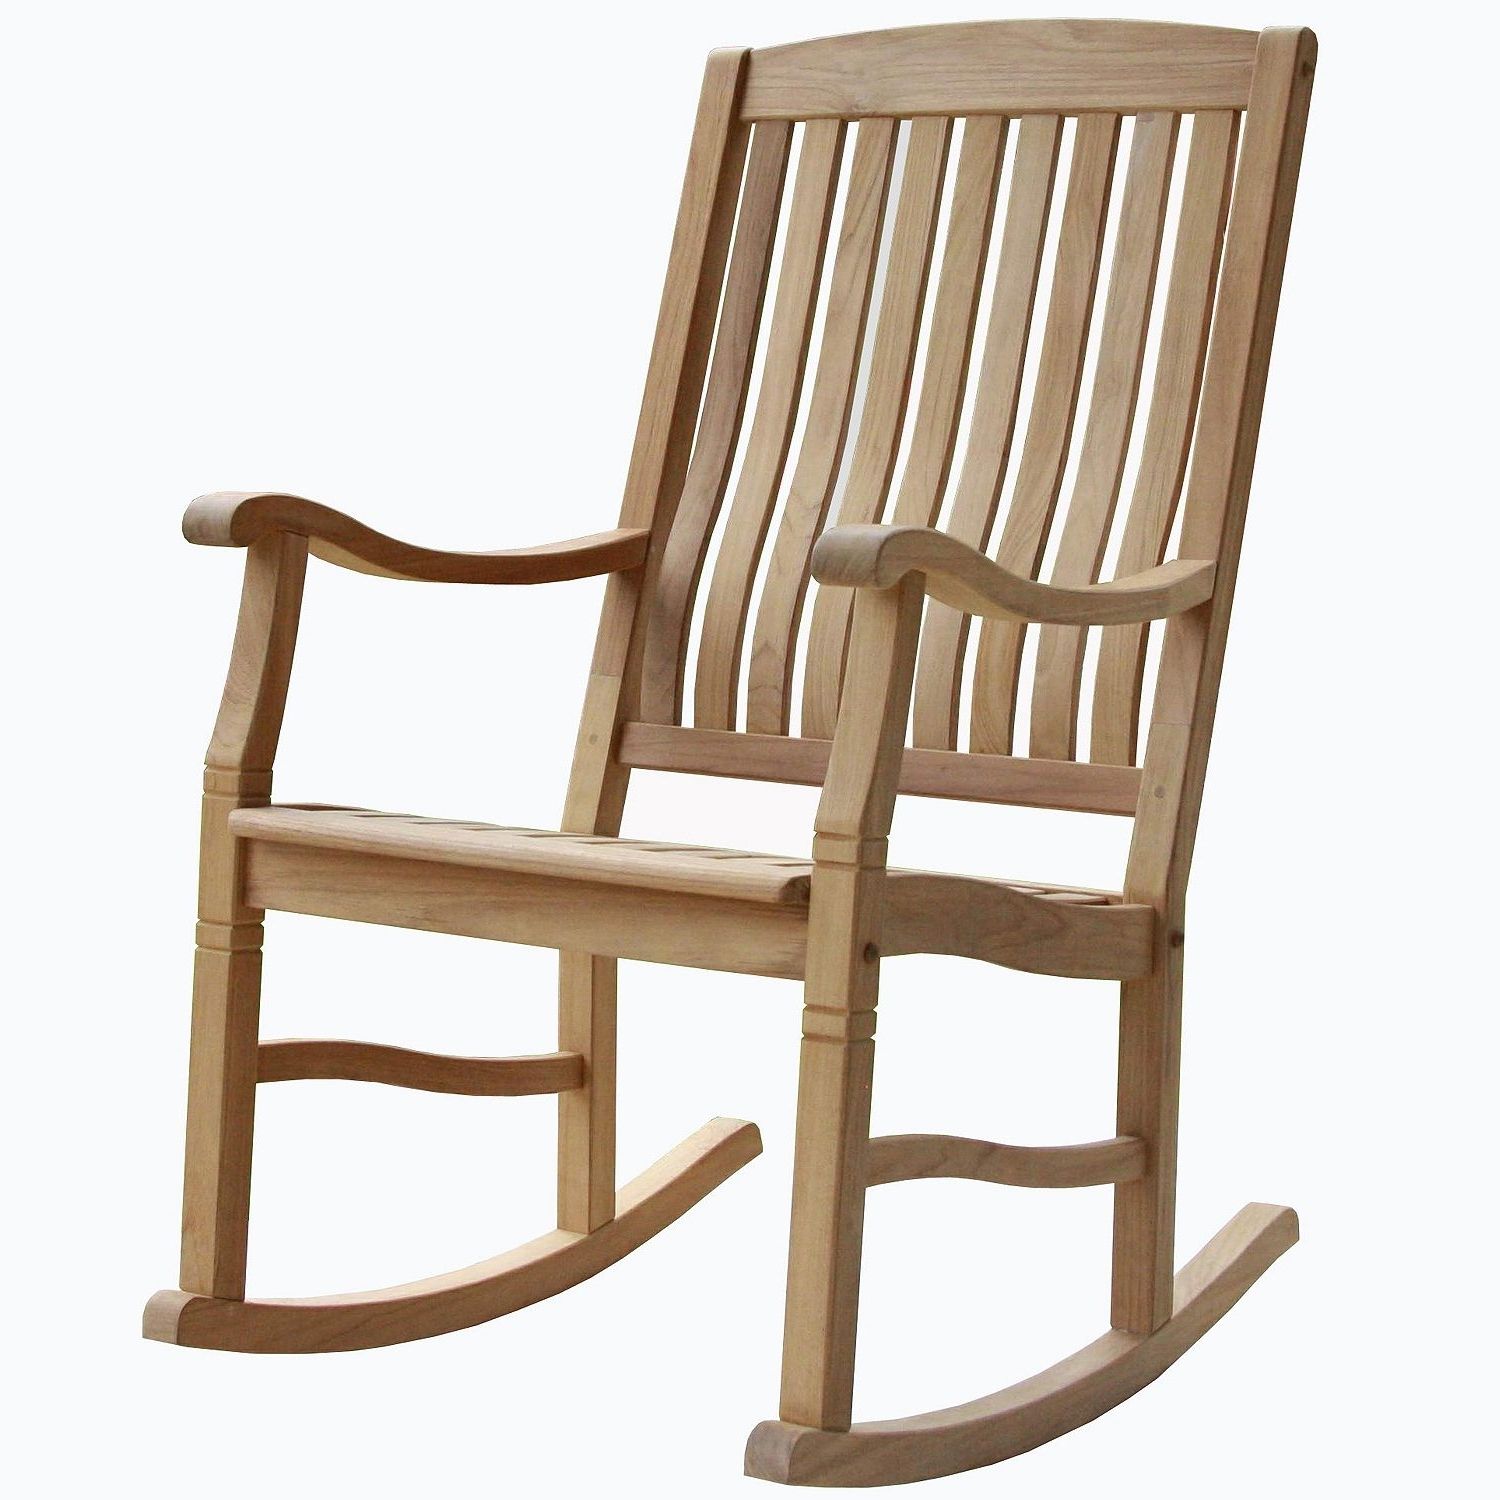 Ebay Pertaining To Most Recently Released Rocking Chairs At Sam's Club (View 1 of 20)